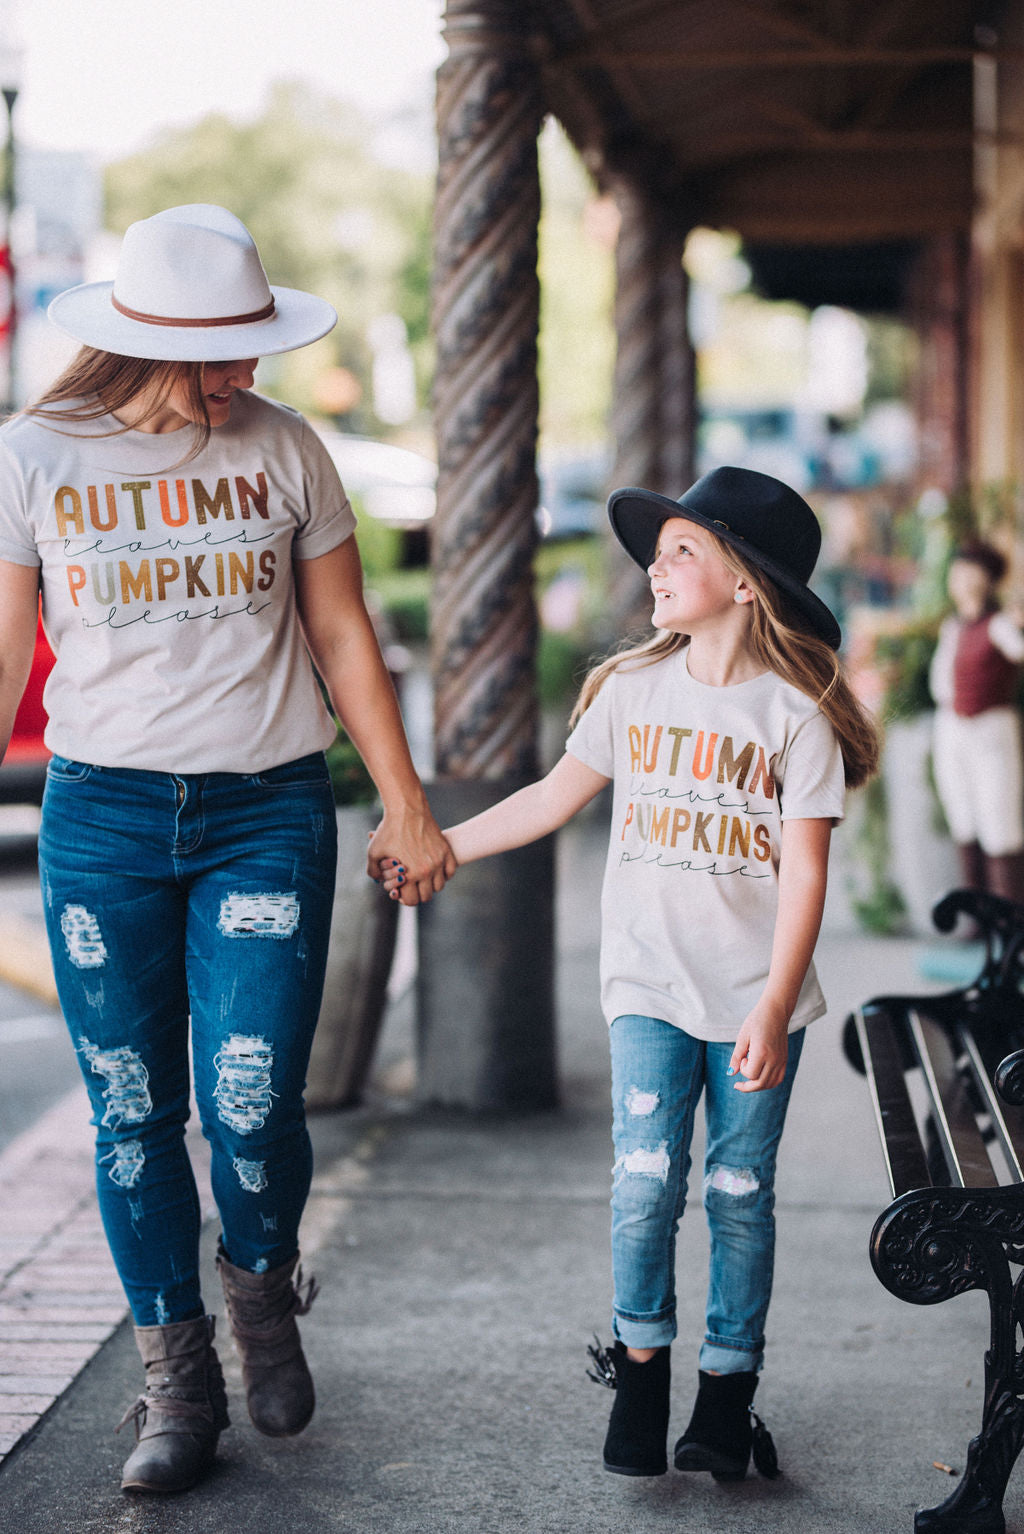 Autumn Leave Pumpkins Please- Mommy and Me Shirts - FALL Tee/ Bella Canvas / Fall Layering Tee / Teachers Tee